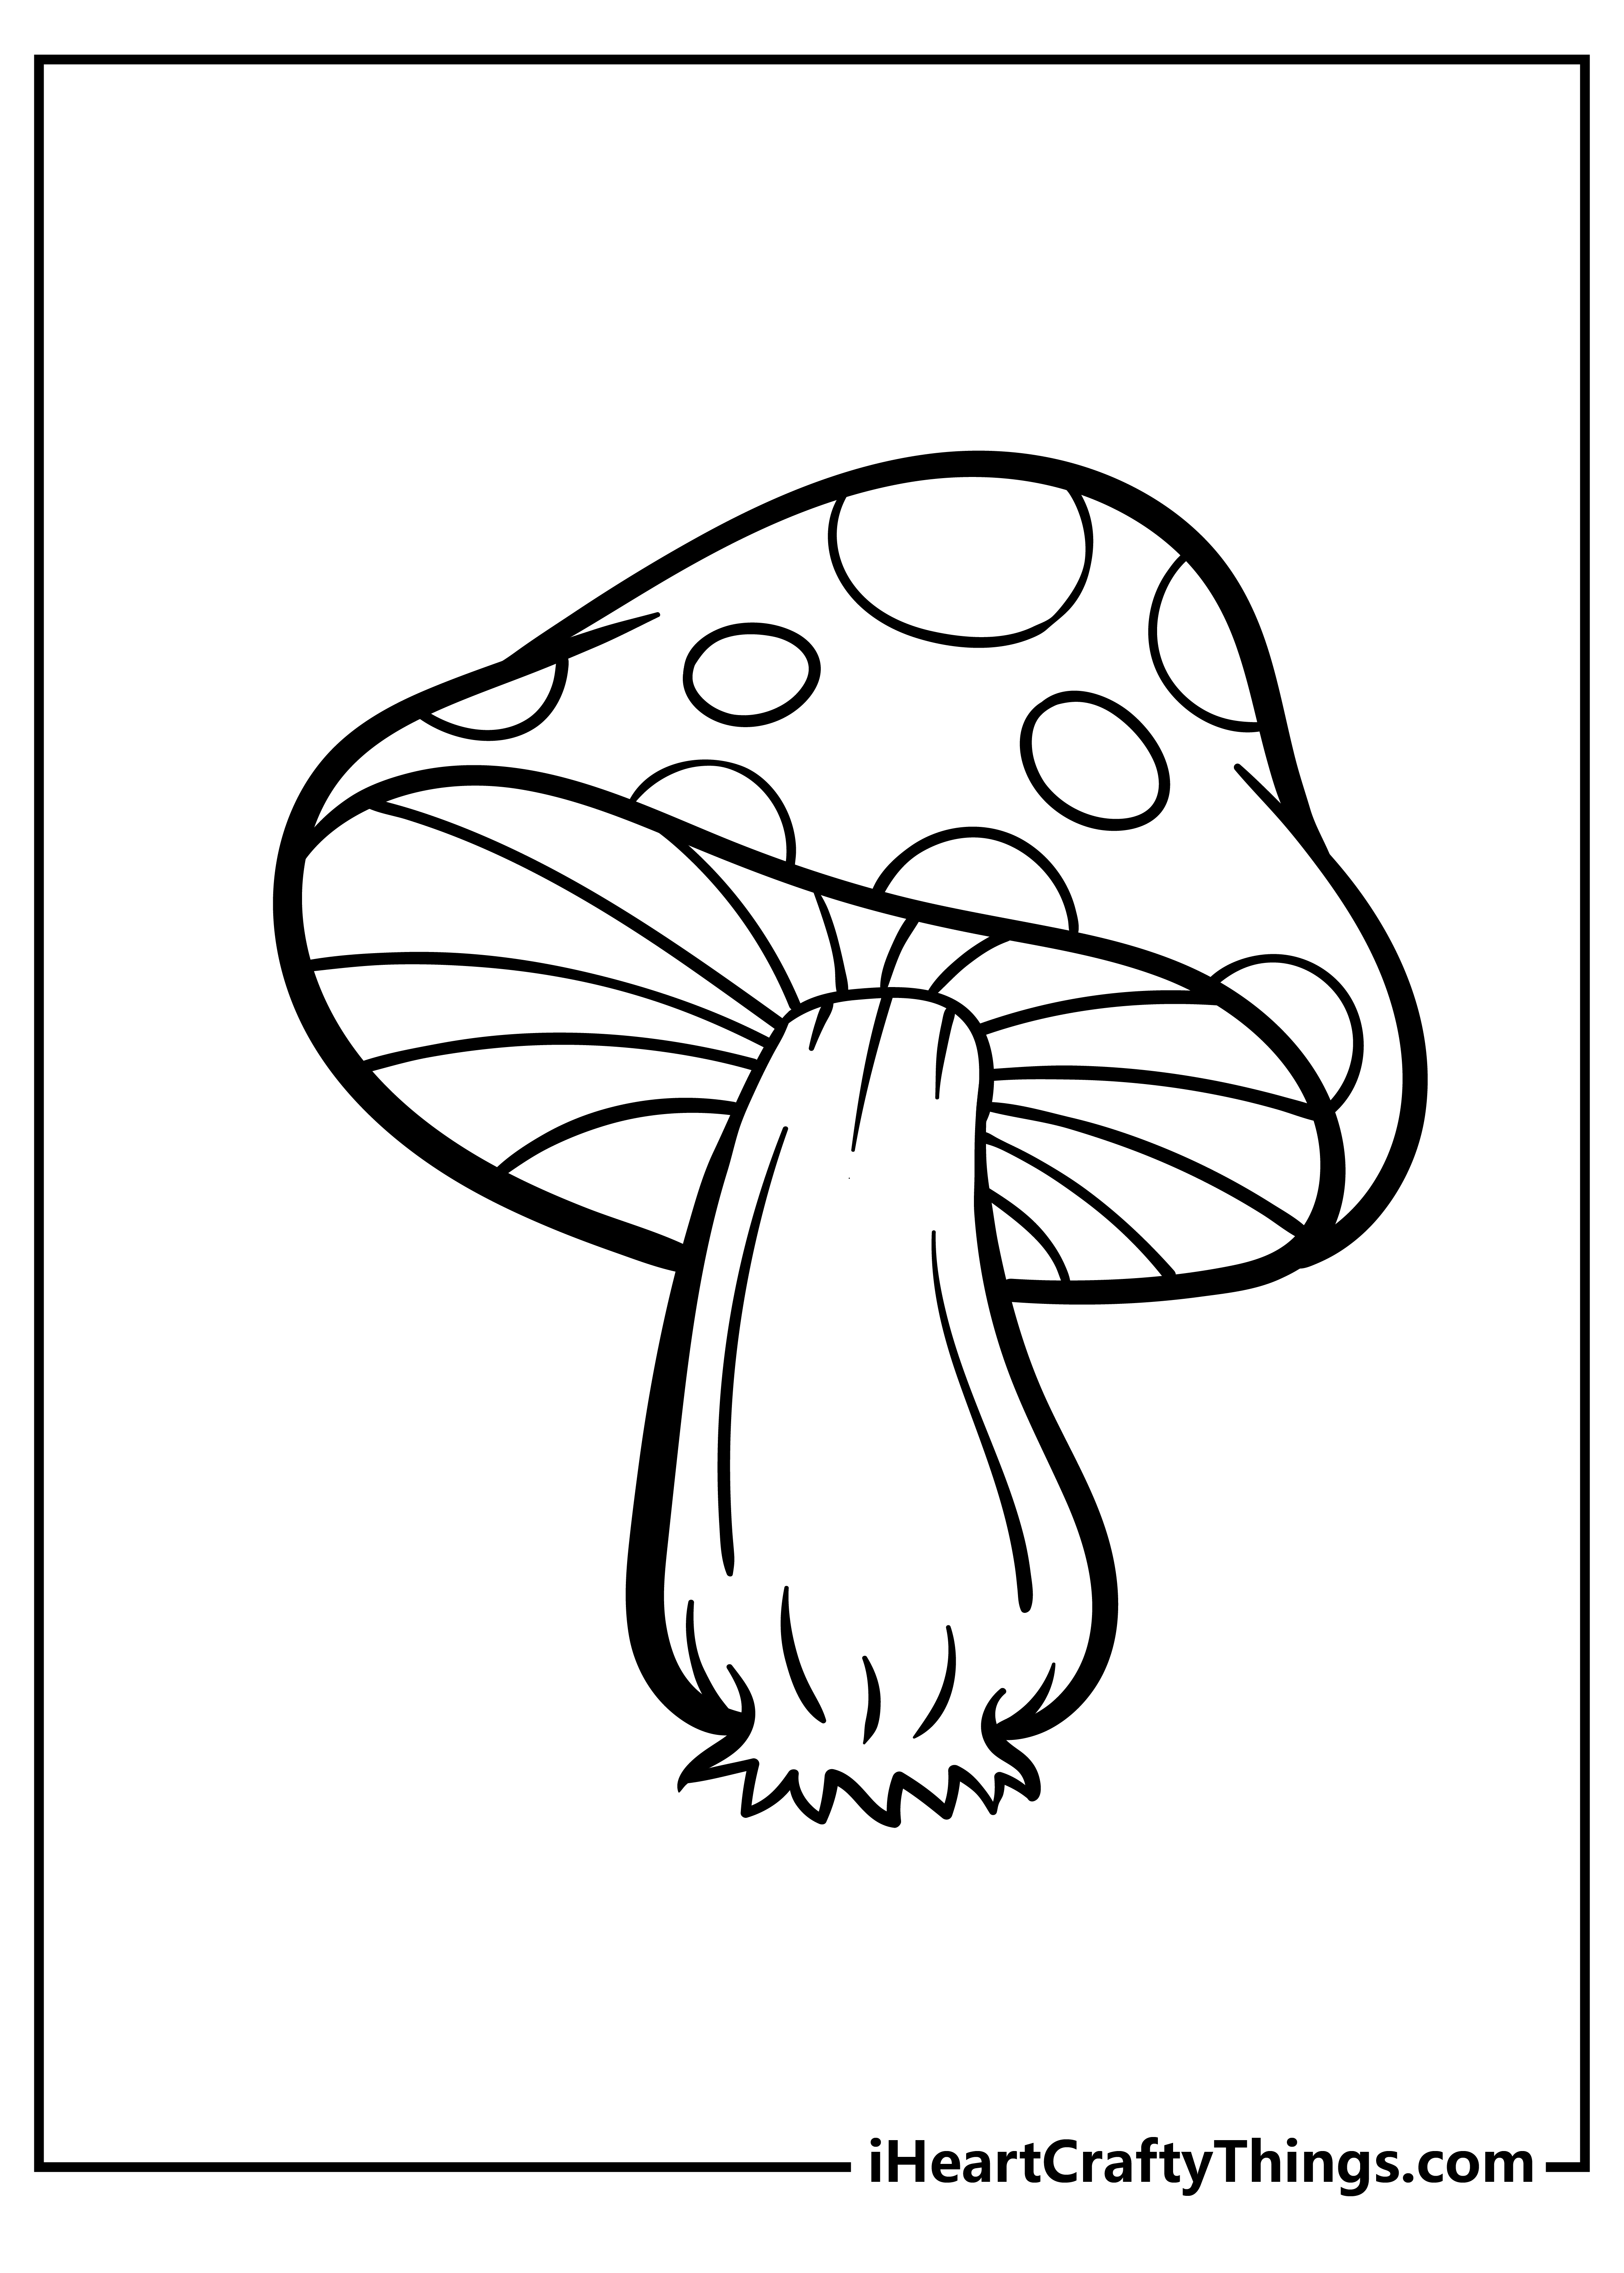 Printable Mushroom Coloring Pages Updated 20